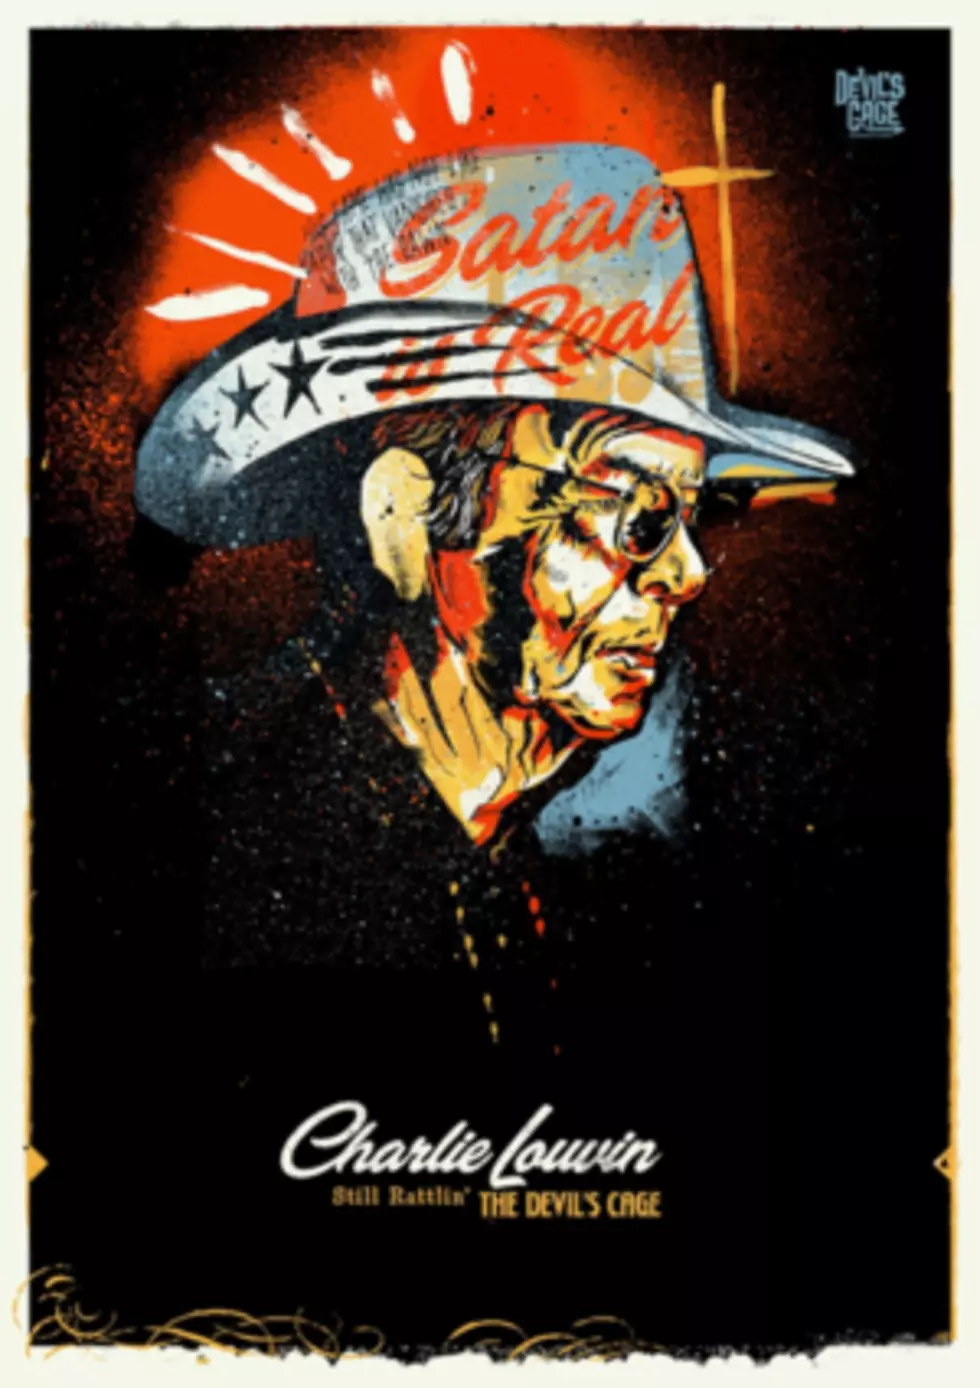 Charlie Louvin Documentary Streaming Online Throughout March